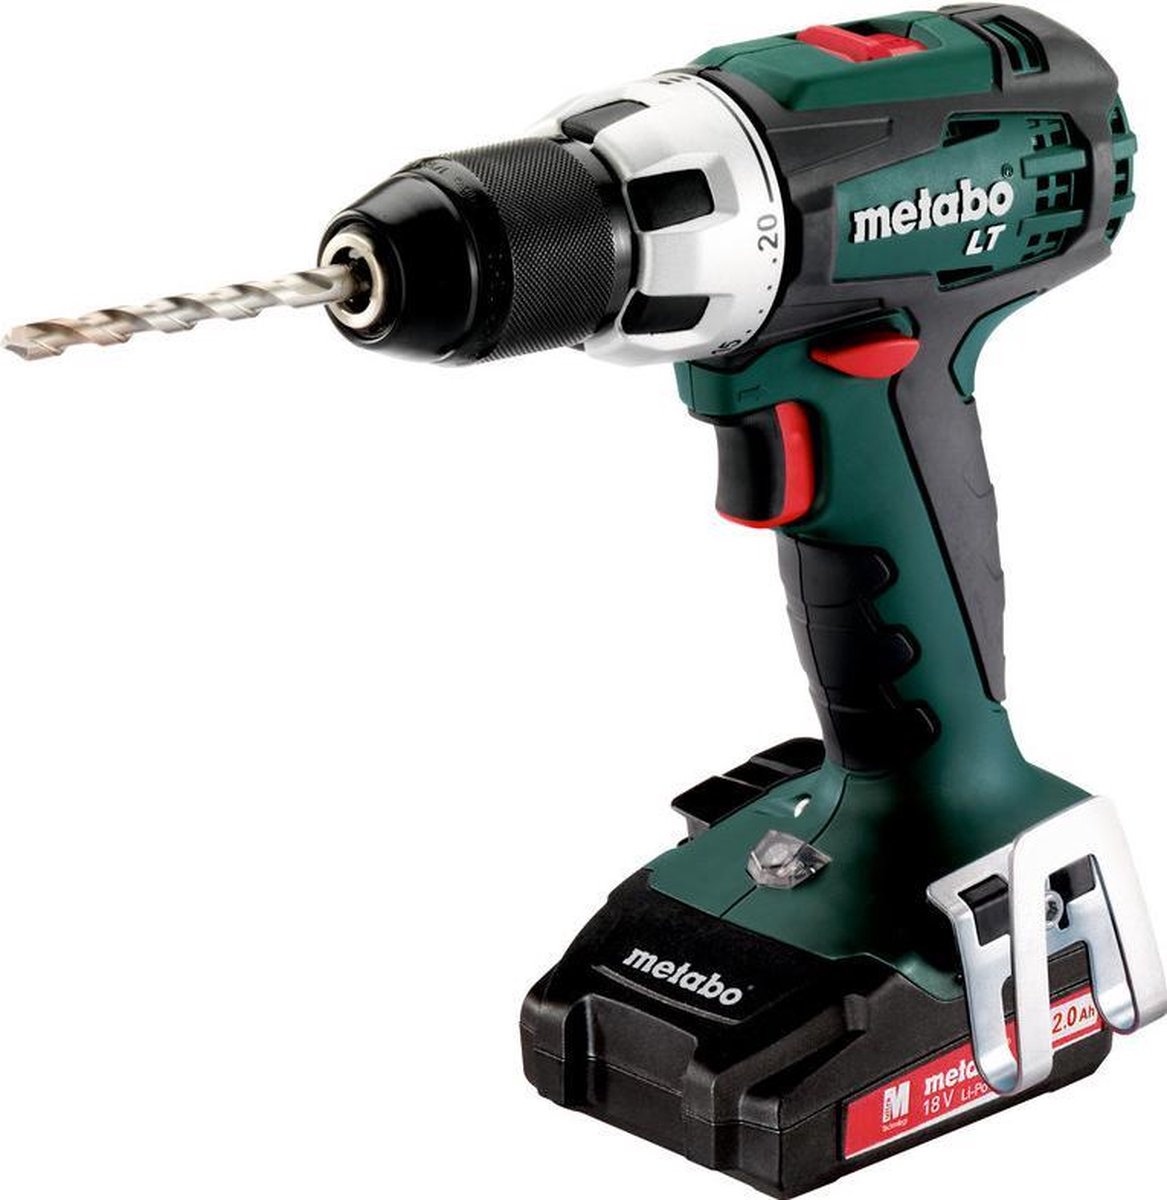 team roterend prins Metabo BS18 LT Accuboormachine - 18V - incl. 2 accu's | bol.com